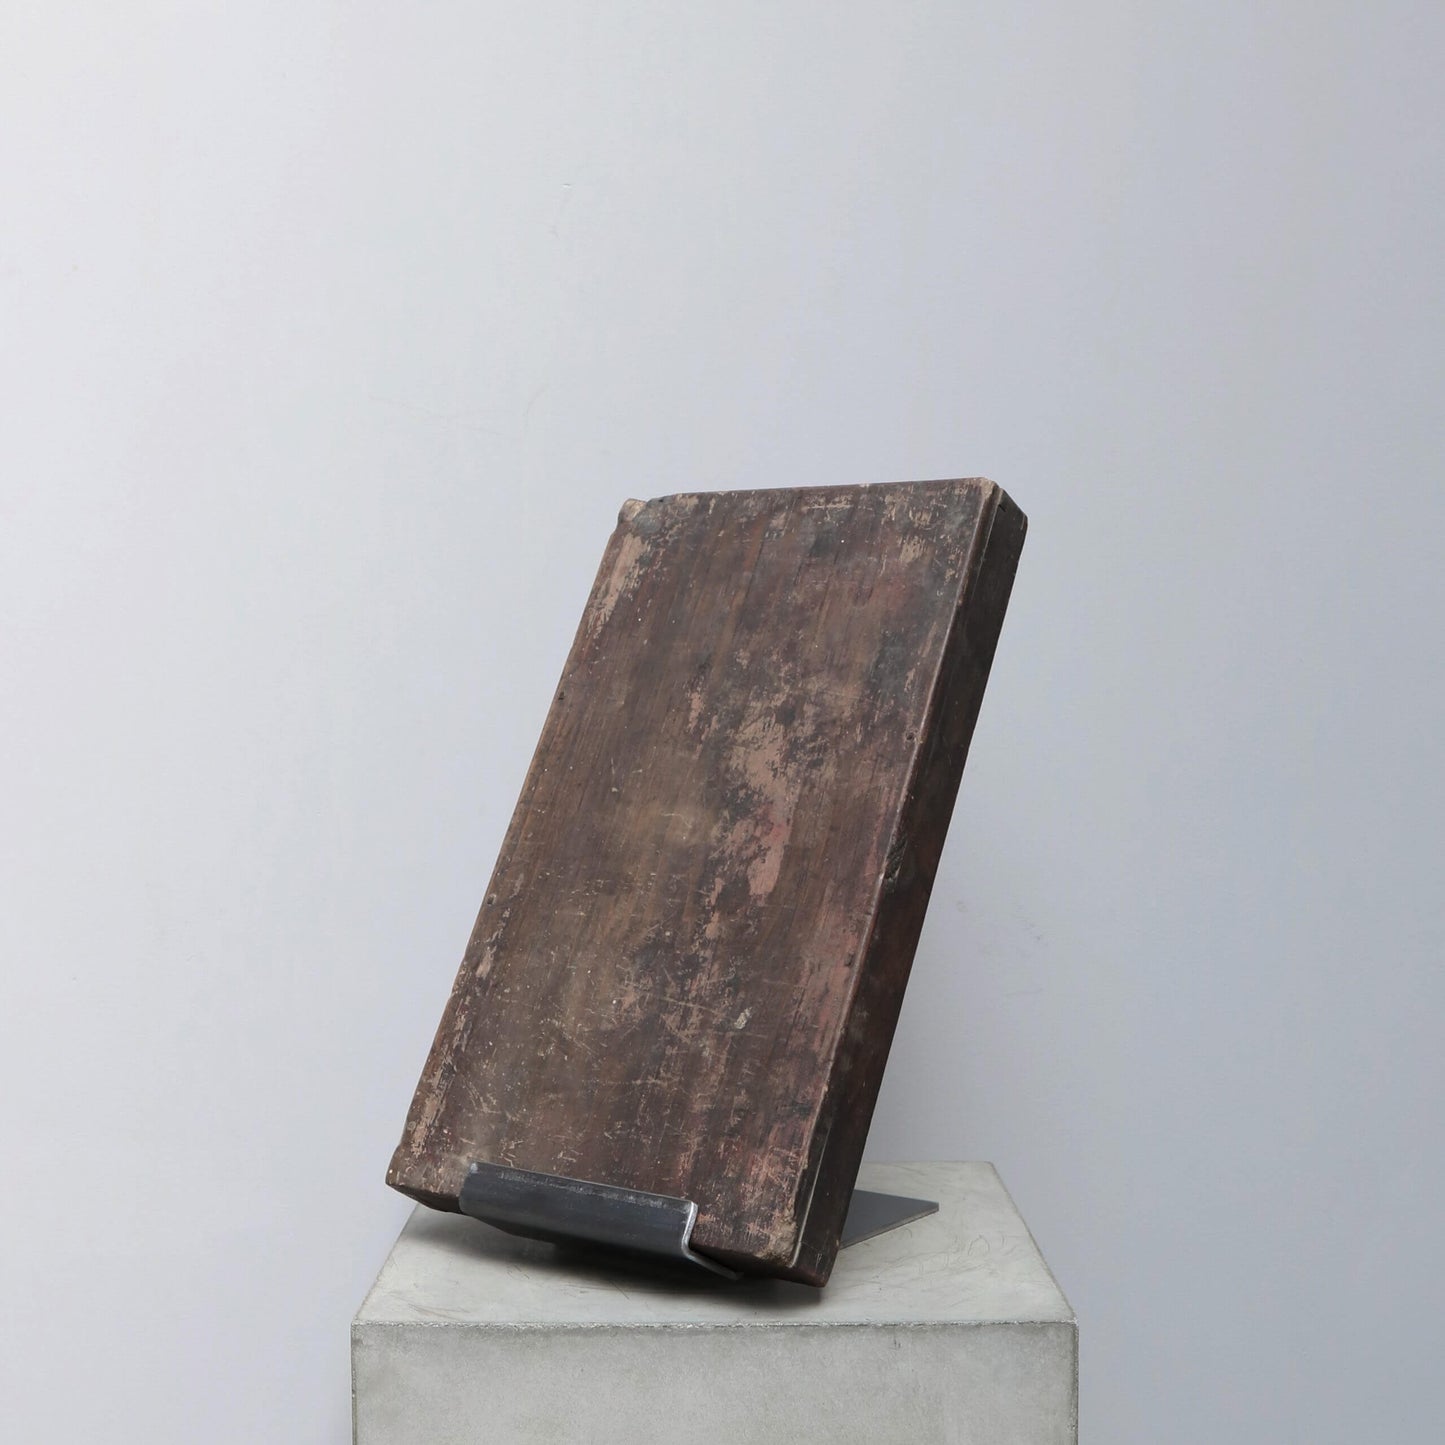 "Iron Stand for art piece/book from Journey" by Oliver Gustav